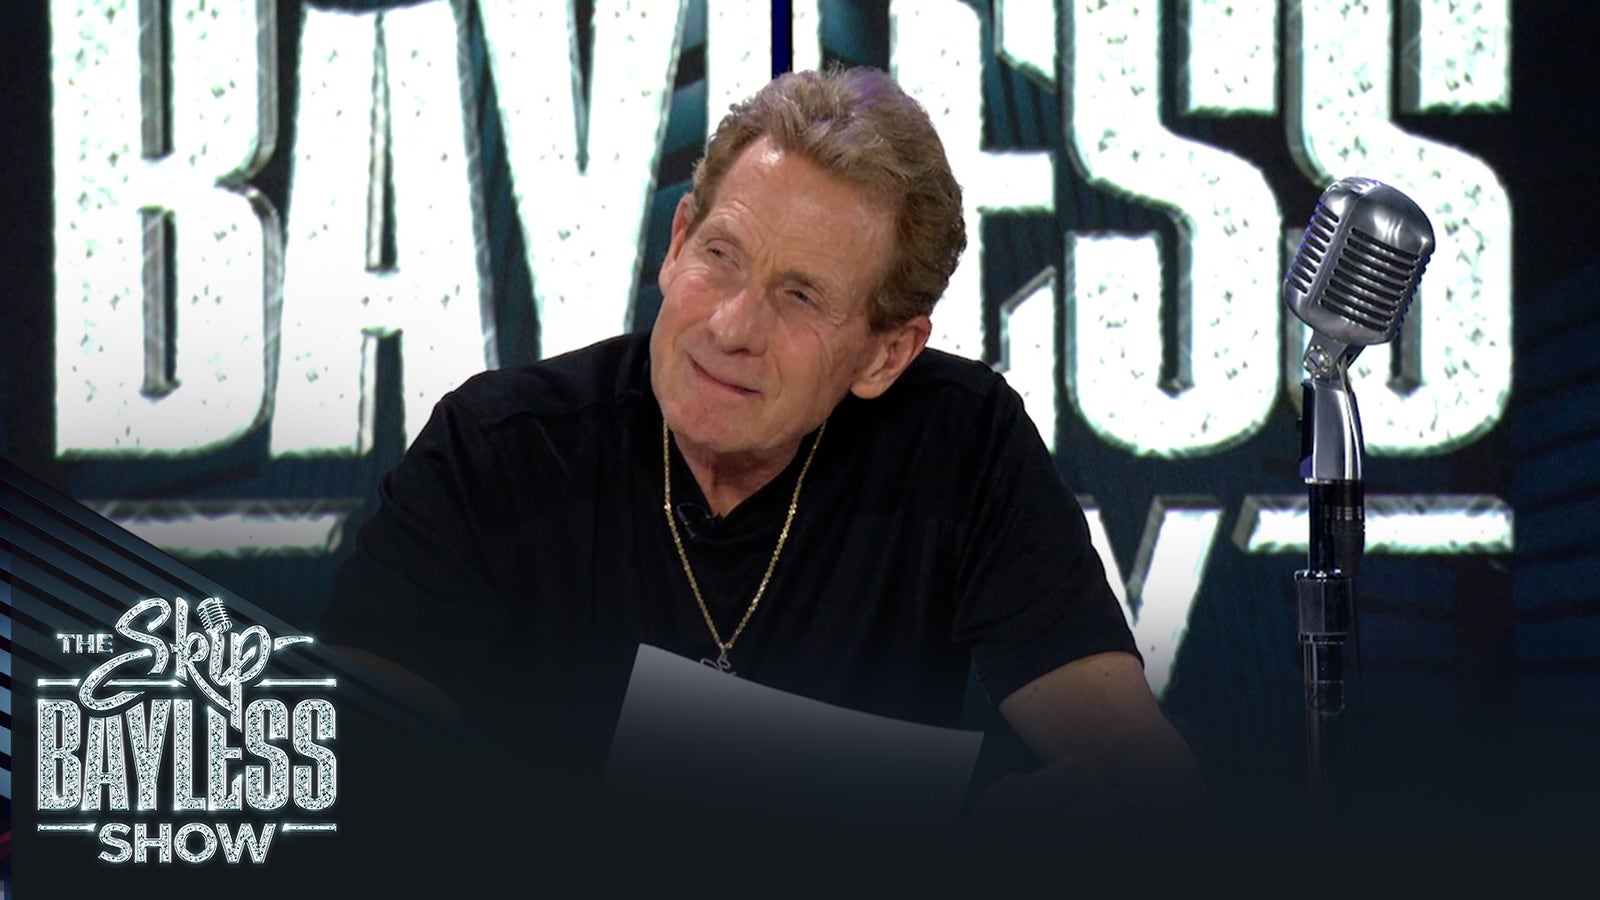 'I will get up on the Undisputed table and dance my ass off' — Skip Bayless on if Cowboys win the Super Bowl